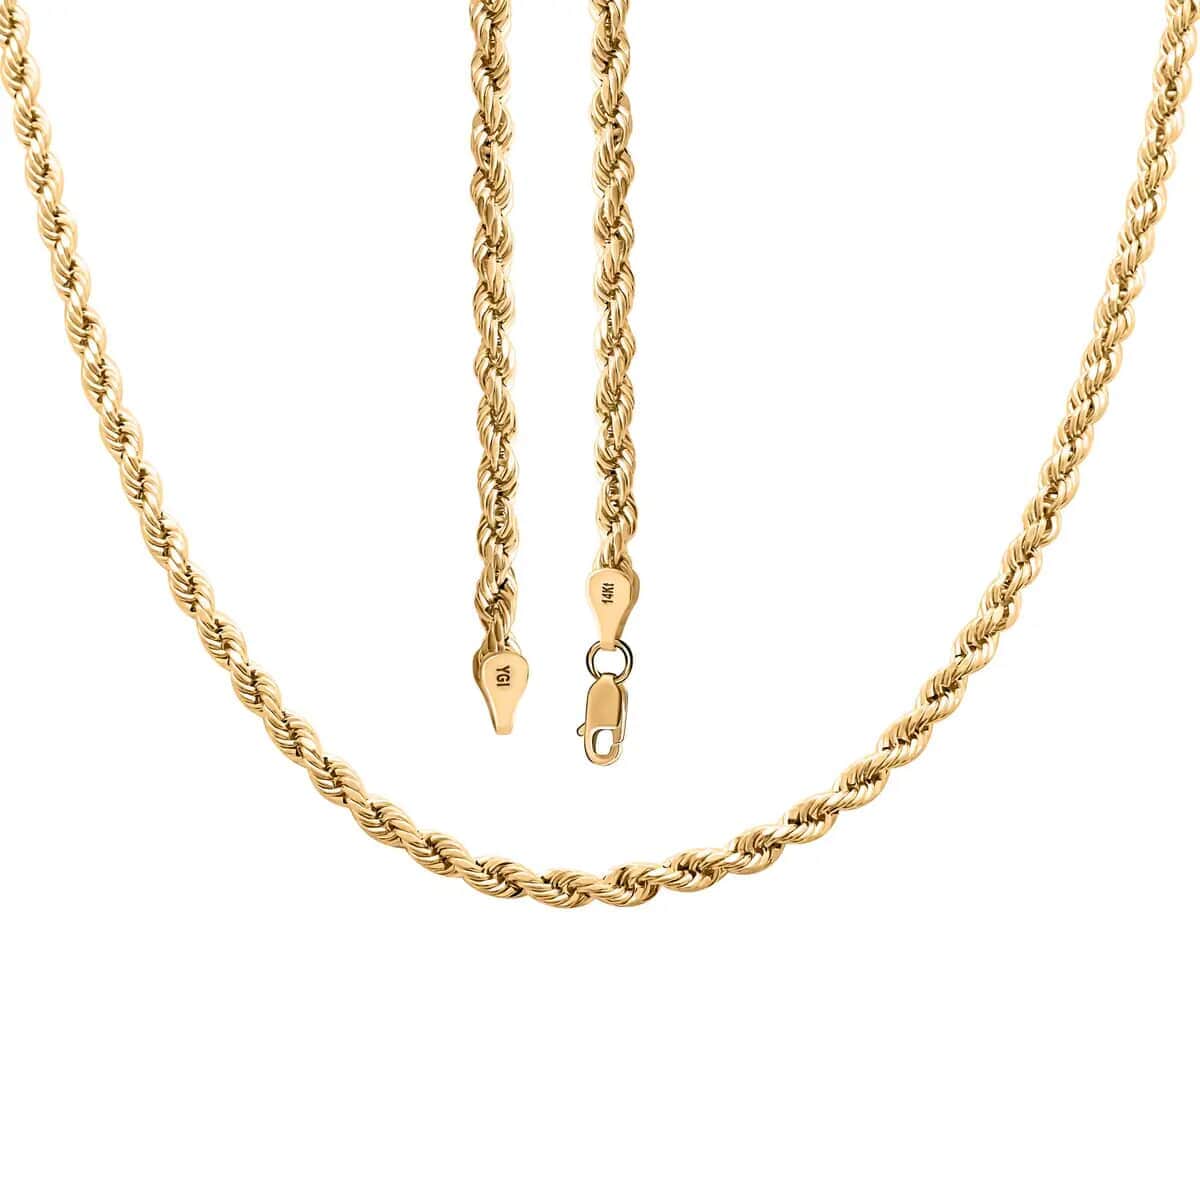 14K Yellow Gold Rope Chain Necklace, Gold Rope Necklace, Gold Gift, 26 Inch Chain Necklace 9.3 grams image number 4